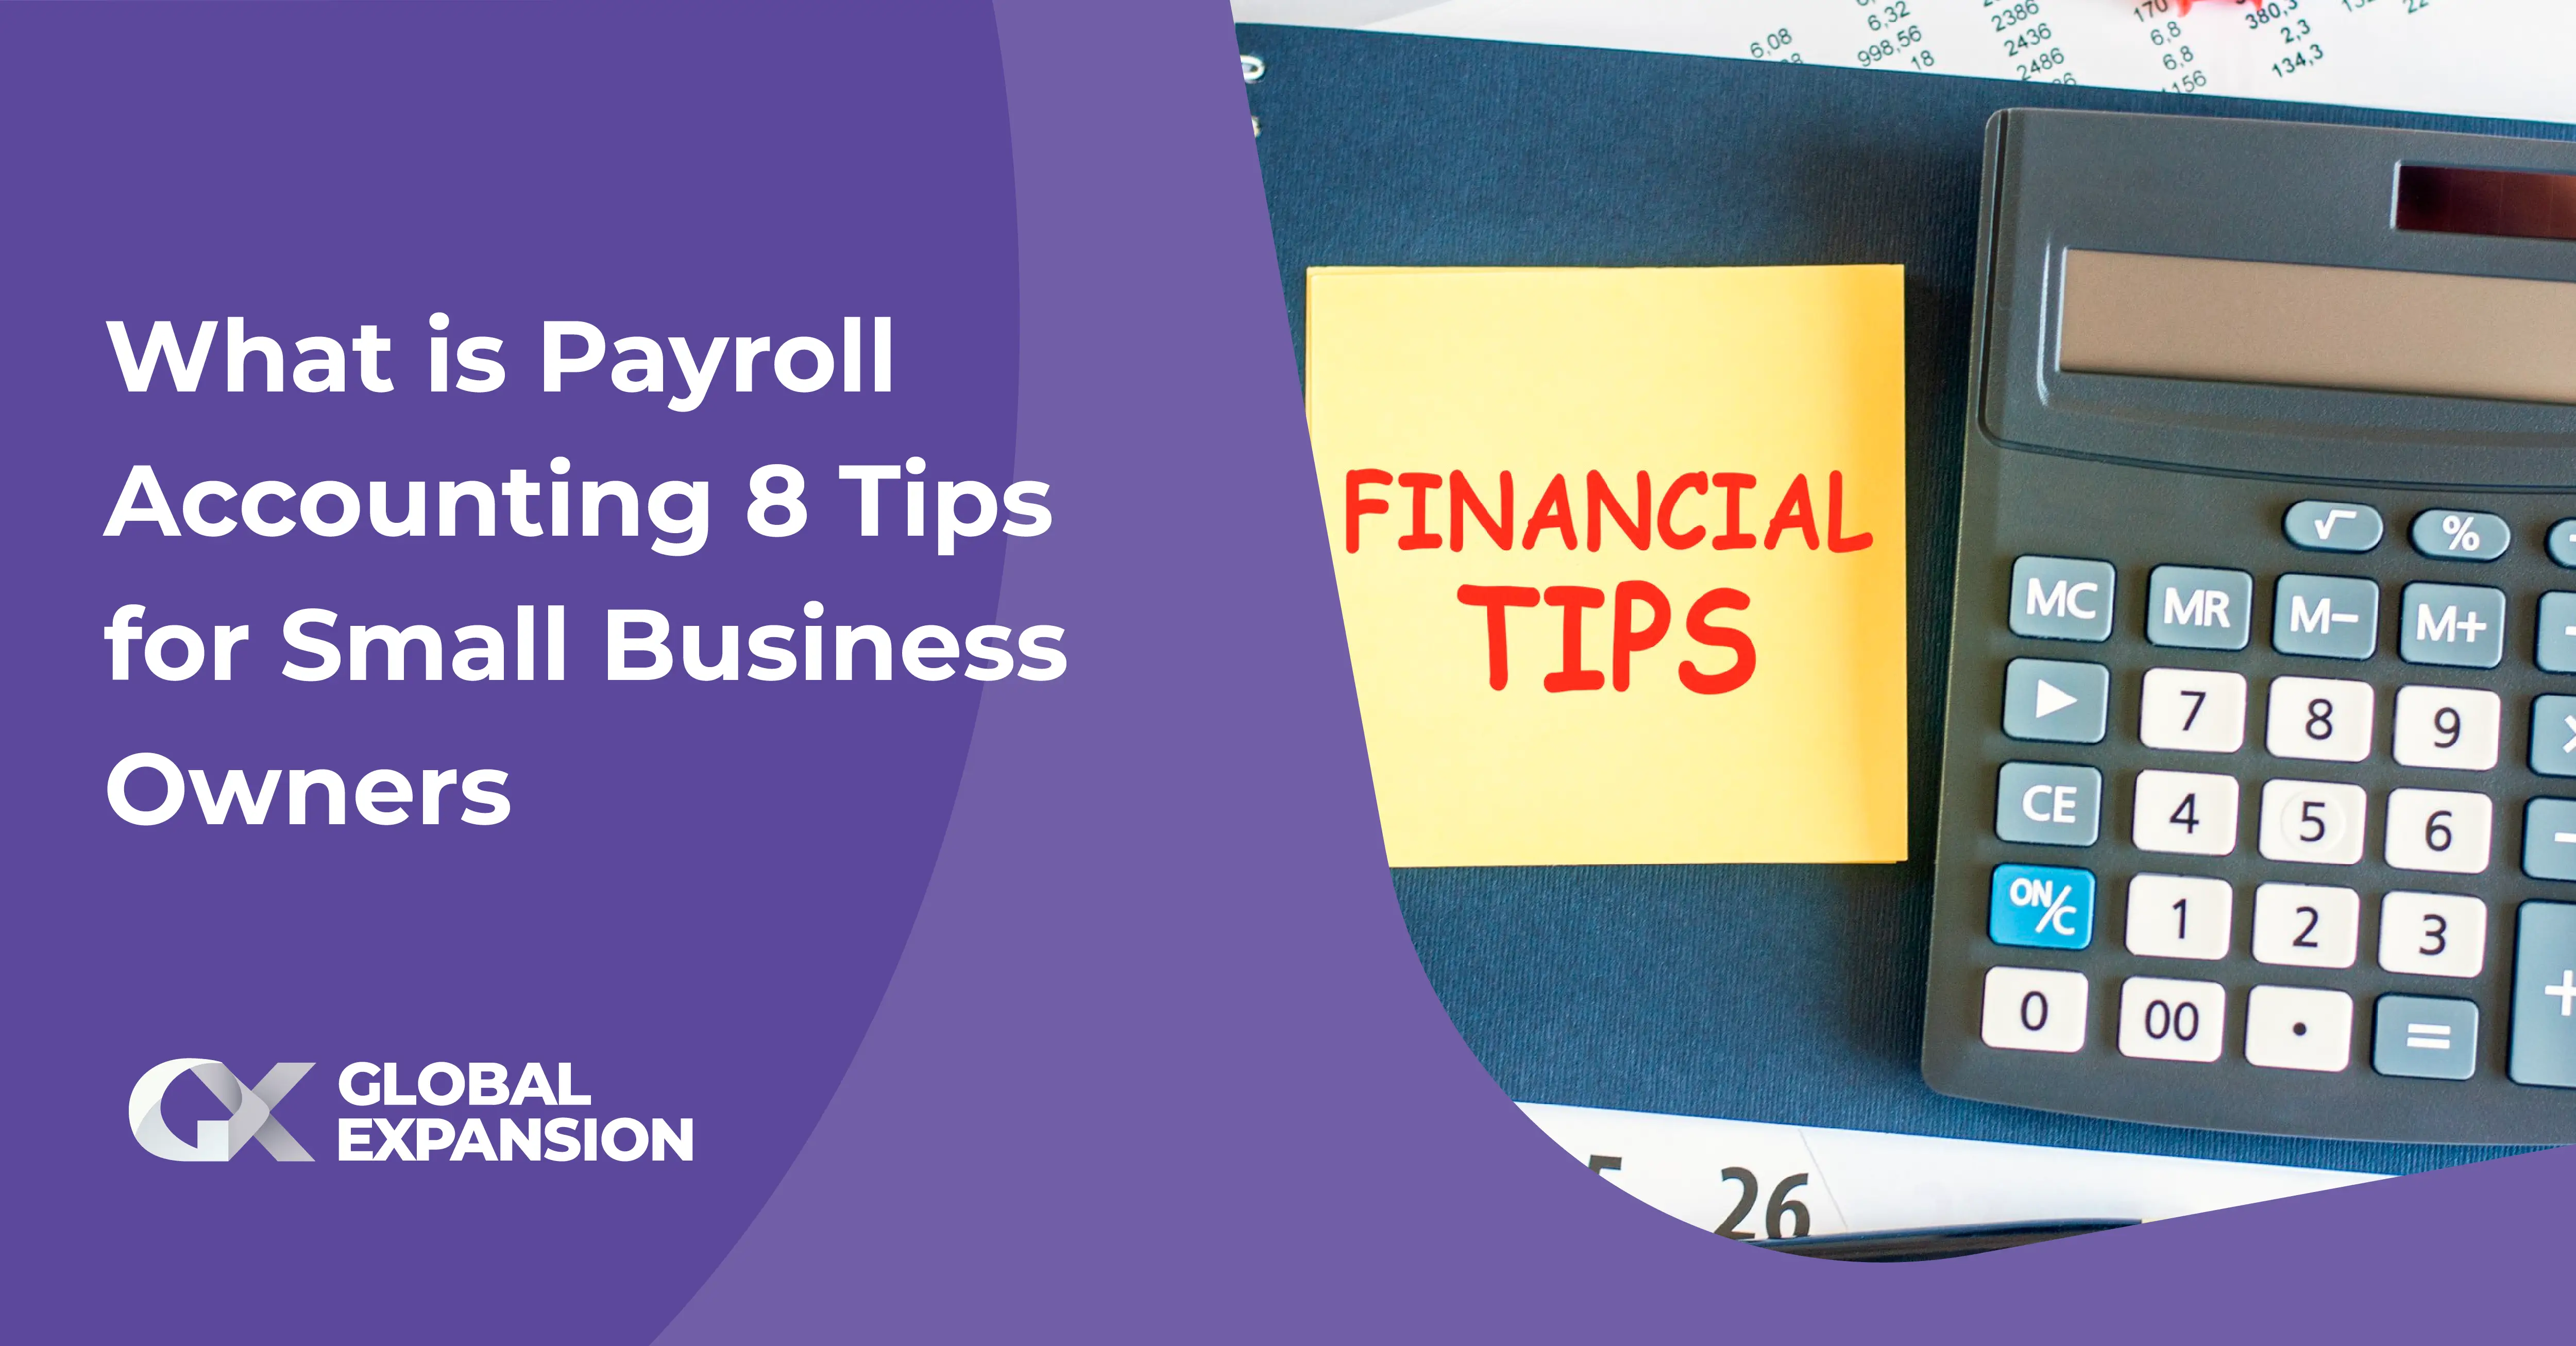 What is Payroll Accounting: 8 Tips for Small Business Owners